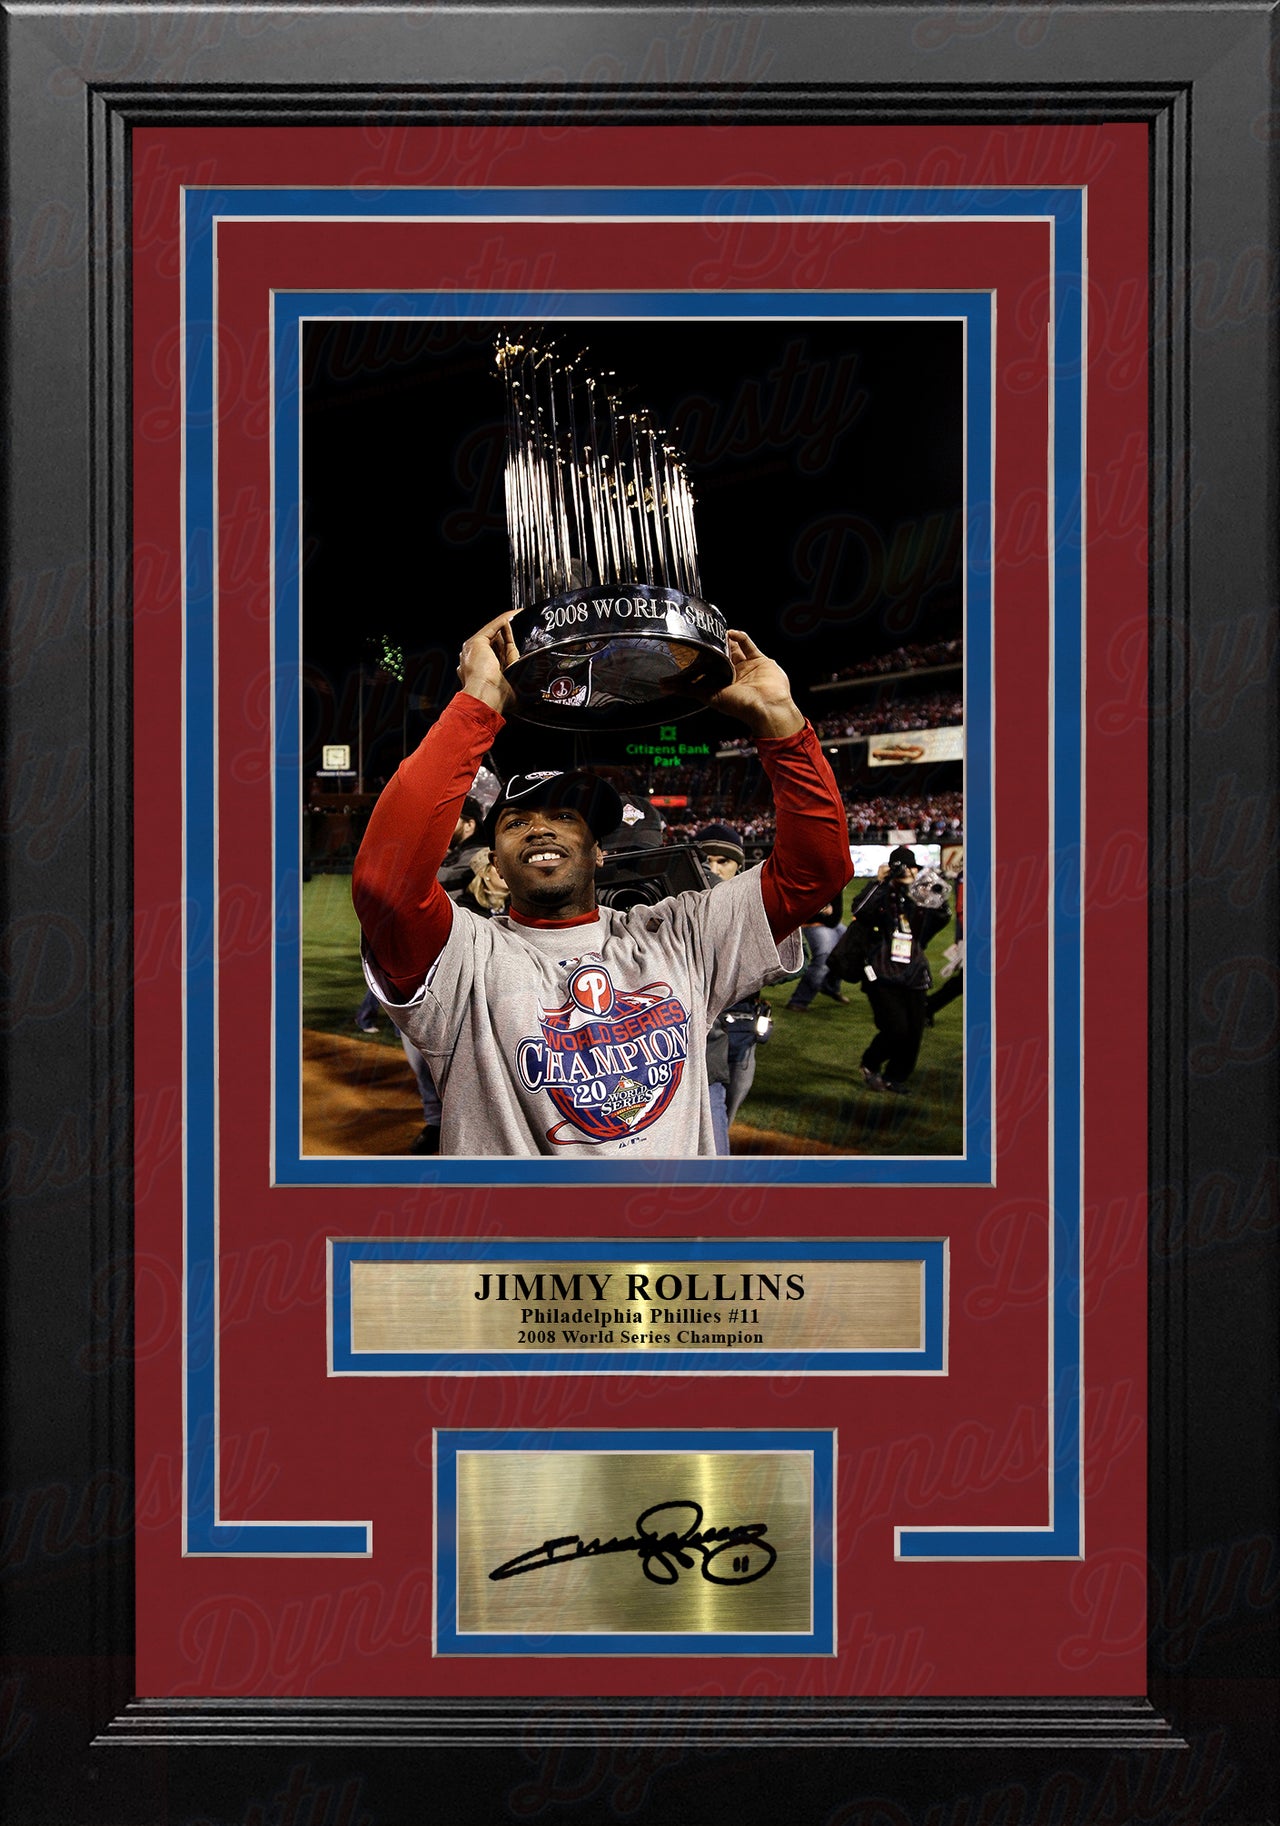 Jimmy Rollins 2008 World Series Trophy Philadelphia Phillies Framed Photo with Engraved Autograph - Dynasty Sports & Framing 